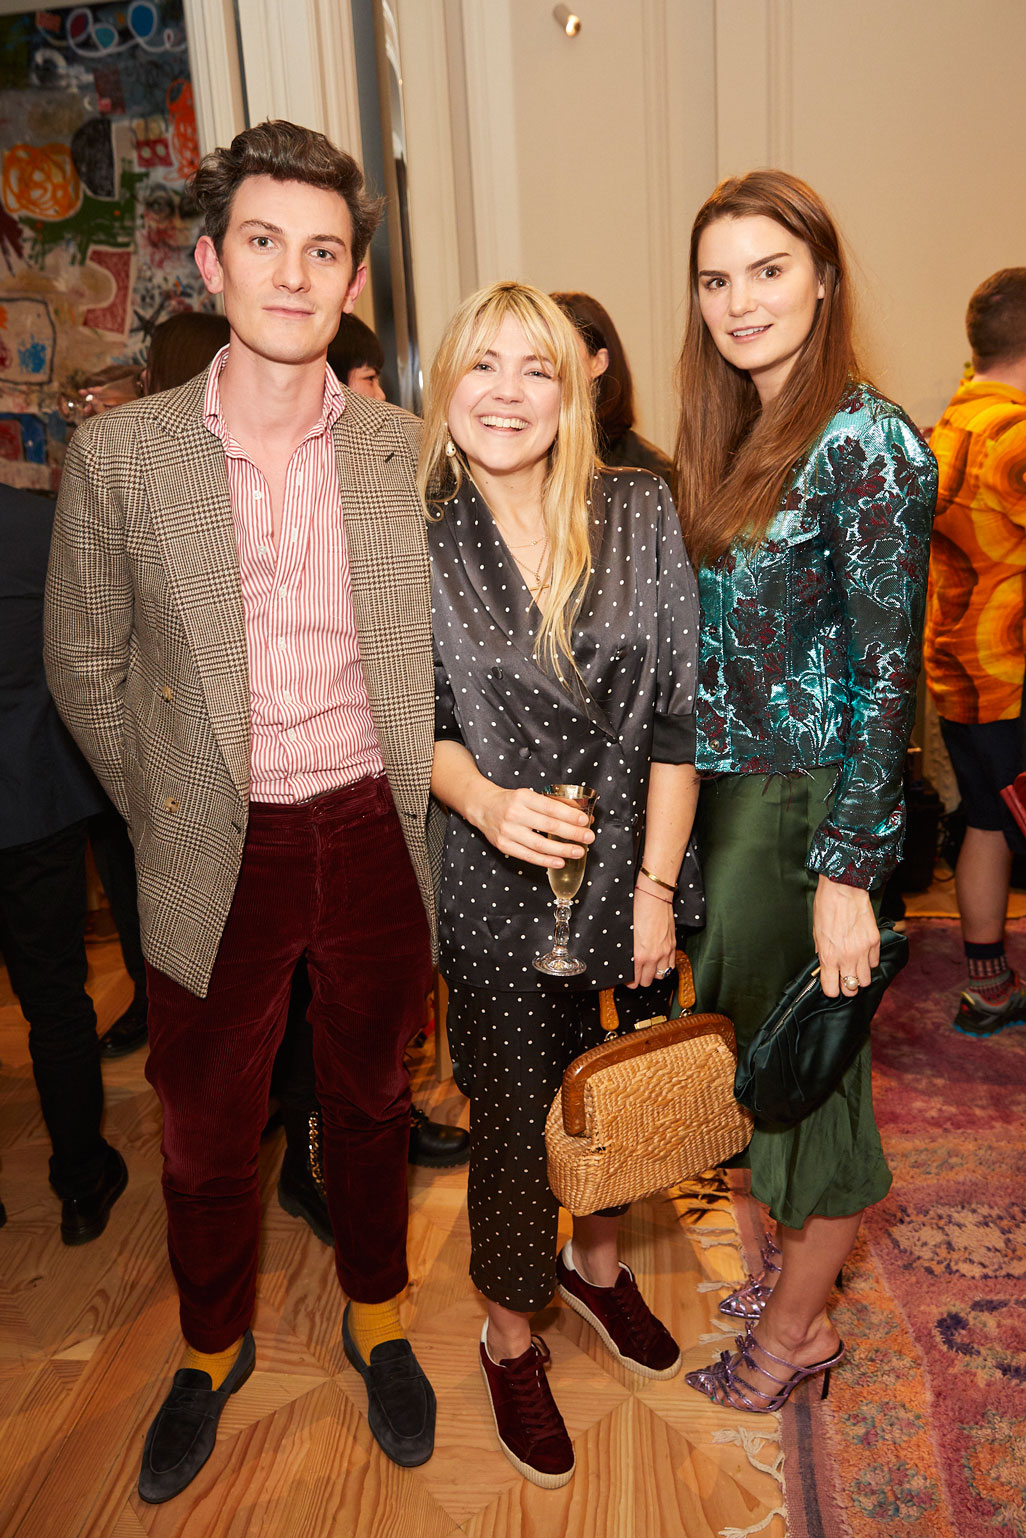 Duncan Campbell, Matilda Goad and Charlotte Rey at at the Interiors launch at MATCHESFASHION.COM in London